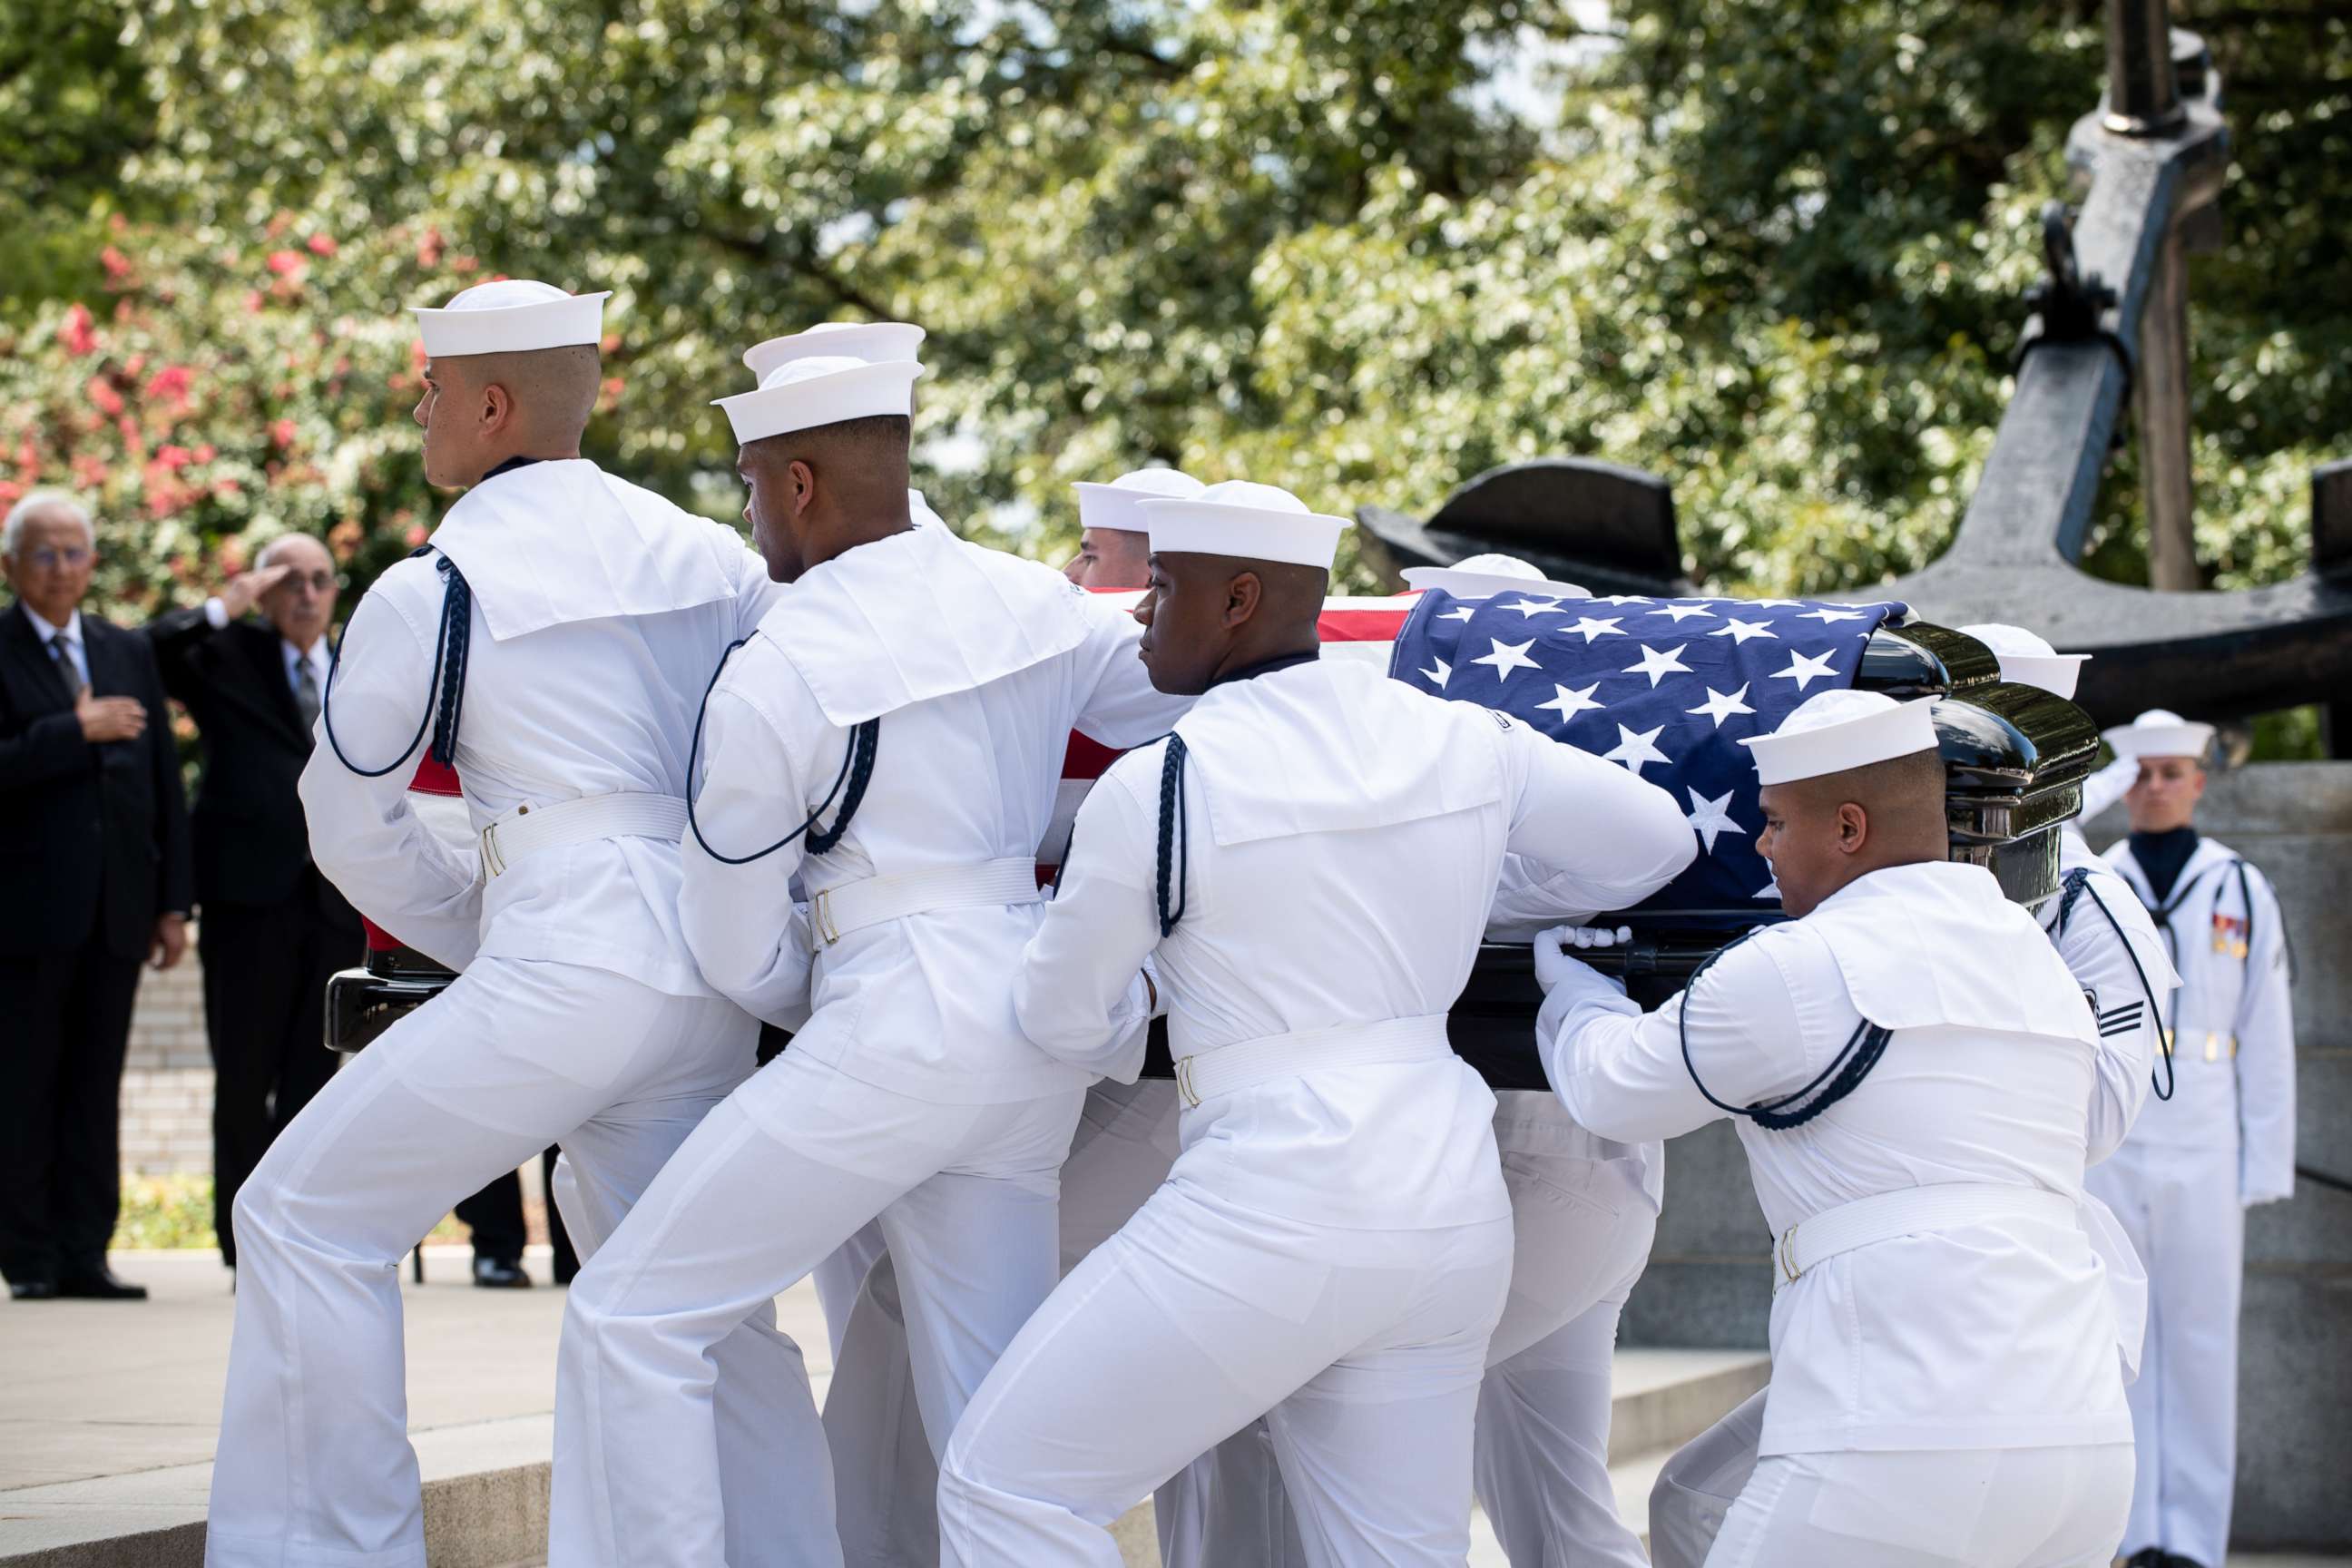 Navy Body Bearers move the casket of the late Sen. John McCain from his processional hearse to the United States Naval Academy Chapel, Sept. 2, 2018. John Sidney McCain, III graduated from the United States Naval Academy in 1958. 